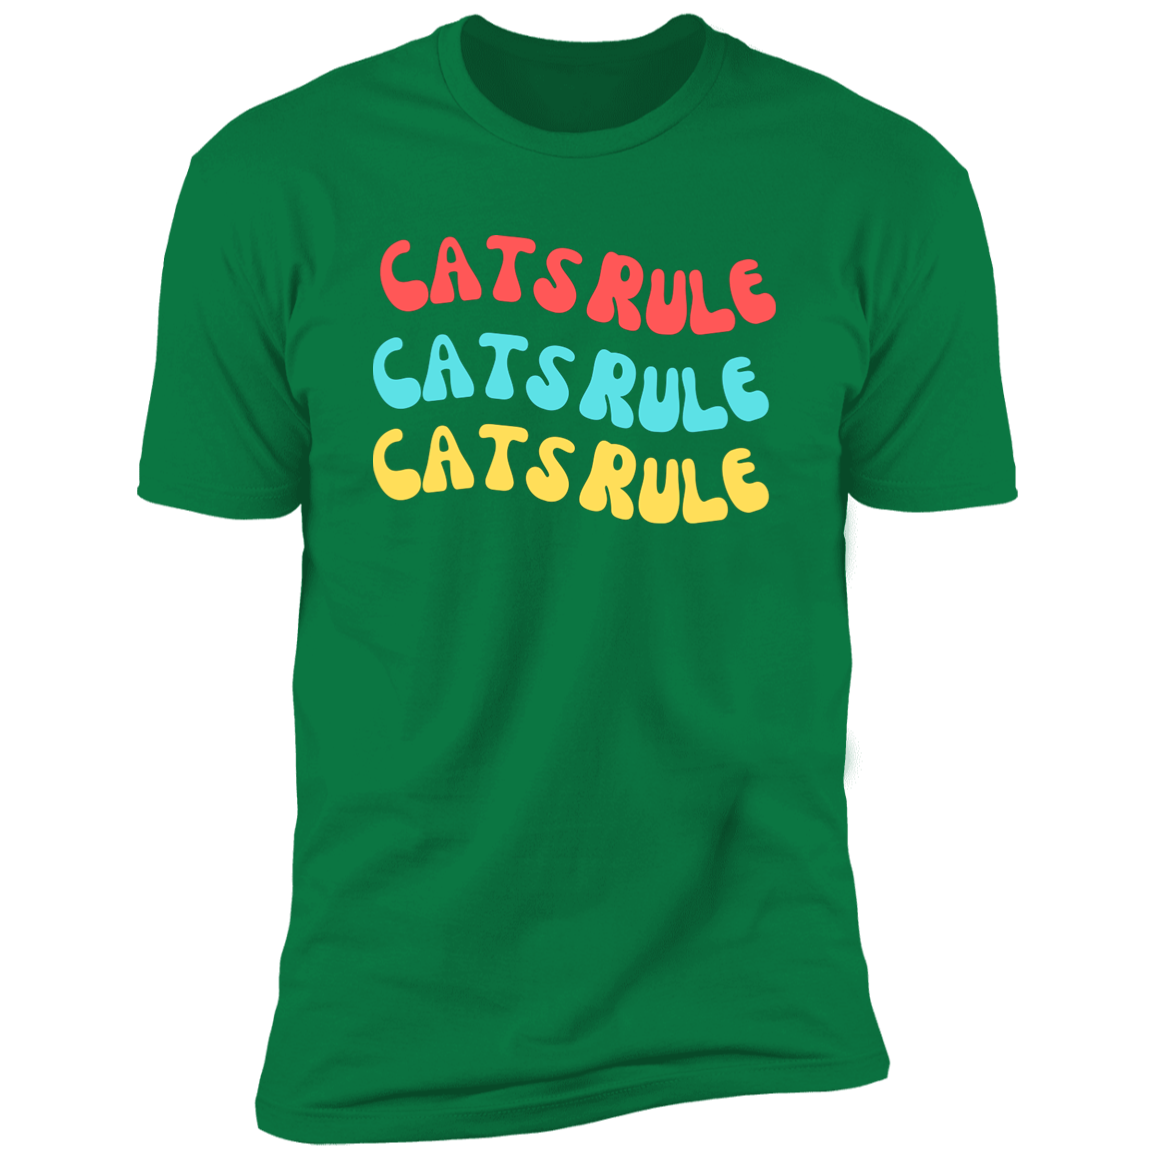 Cats Rule T-shirt, Cat Shirt for humans, in kelly green